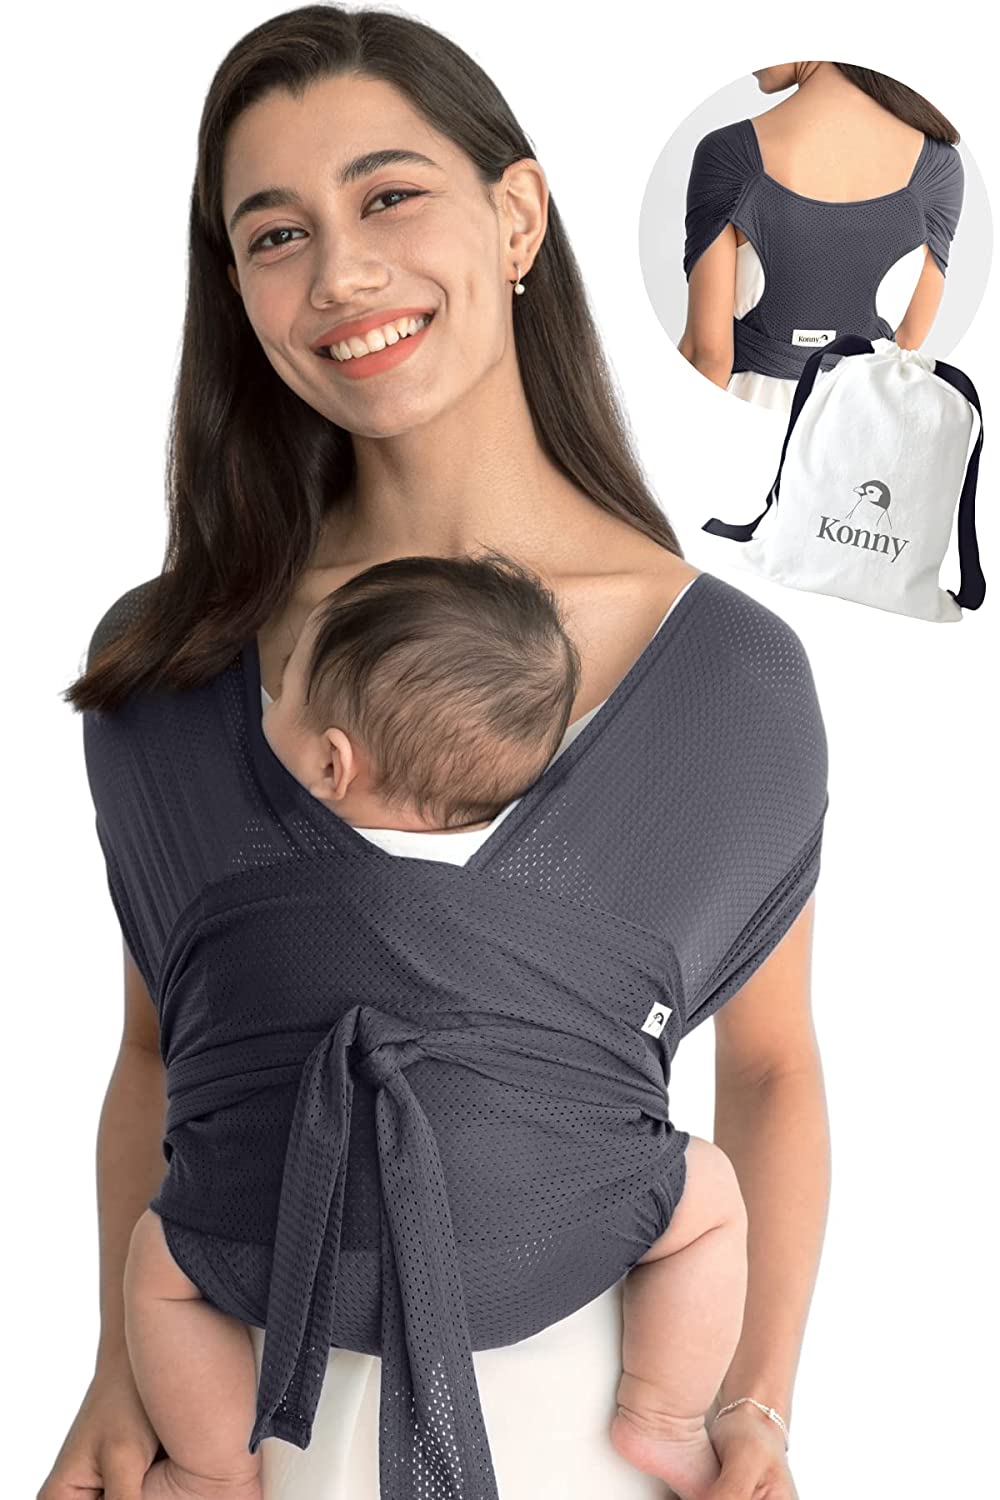 Konny Air Mesh Baby Carrier | Ultra Light, Easy Baby Wrap | Newborns, Infants up to 20 kg Toddlers | Cool and Breathable Fabric | Useful Sleep Solution (Anthracite, M)